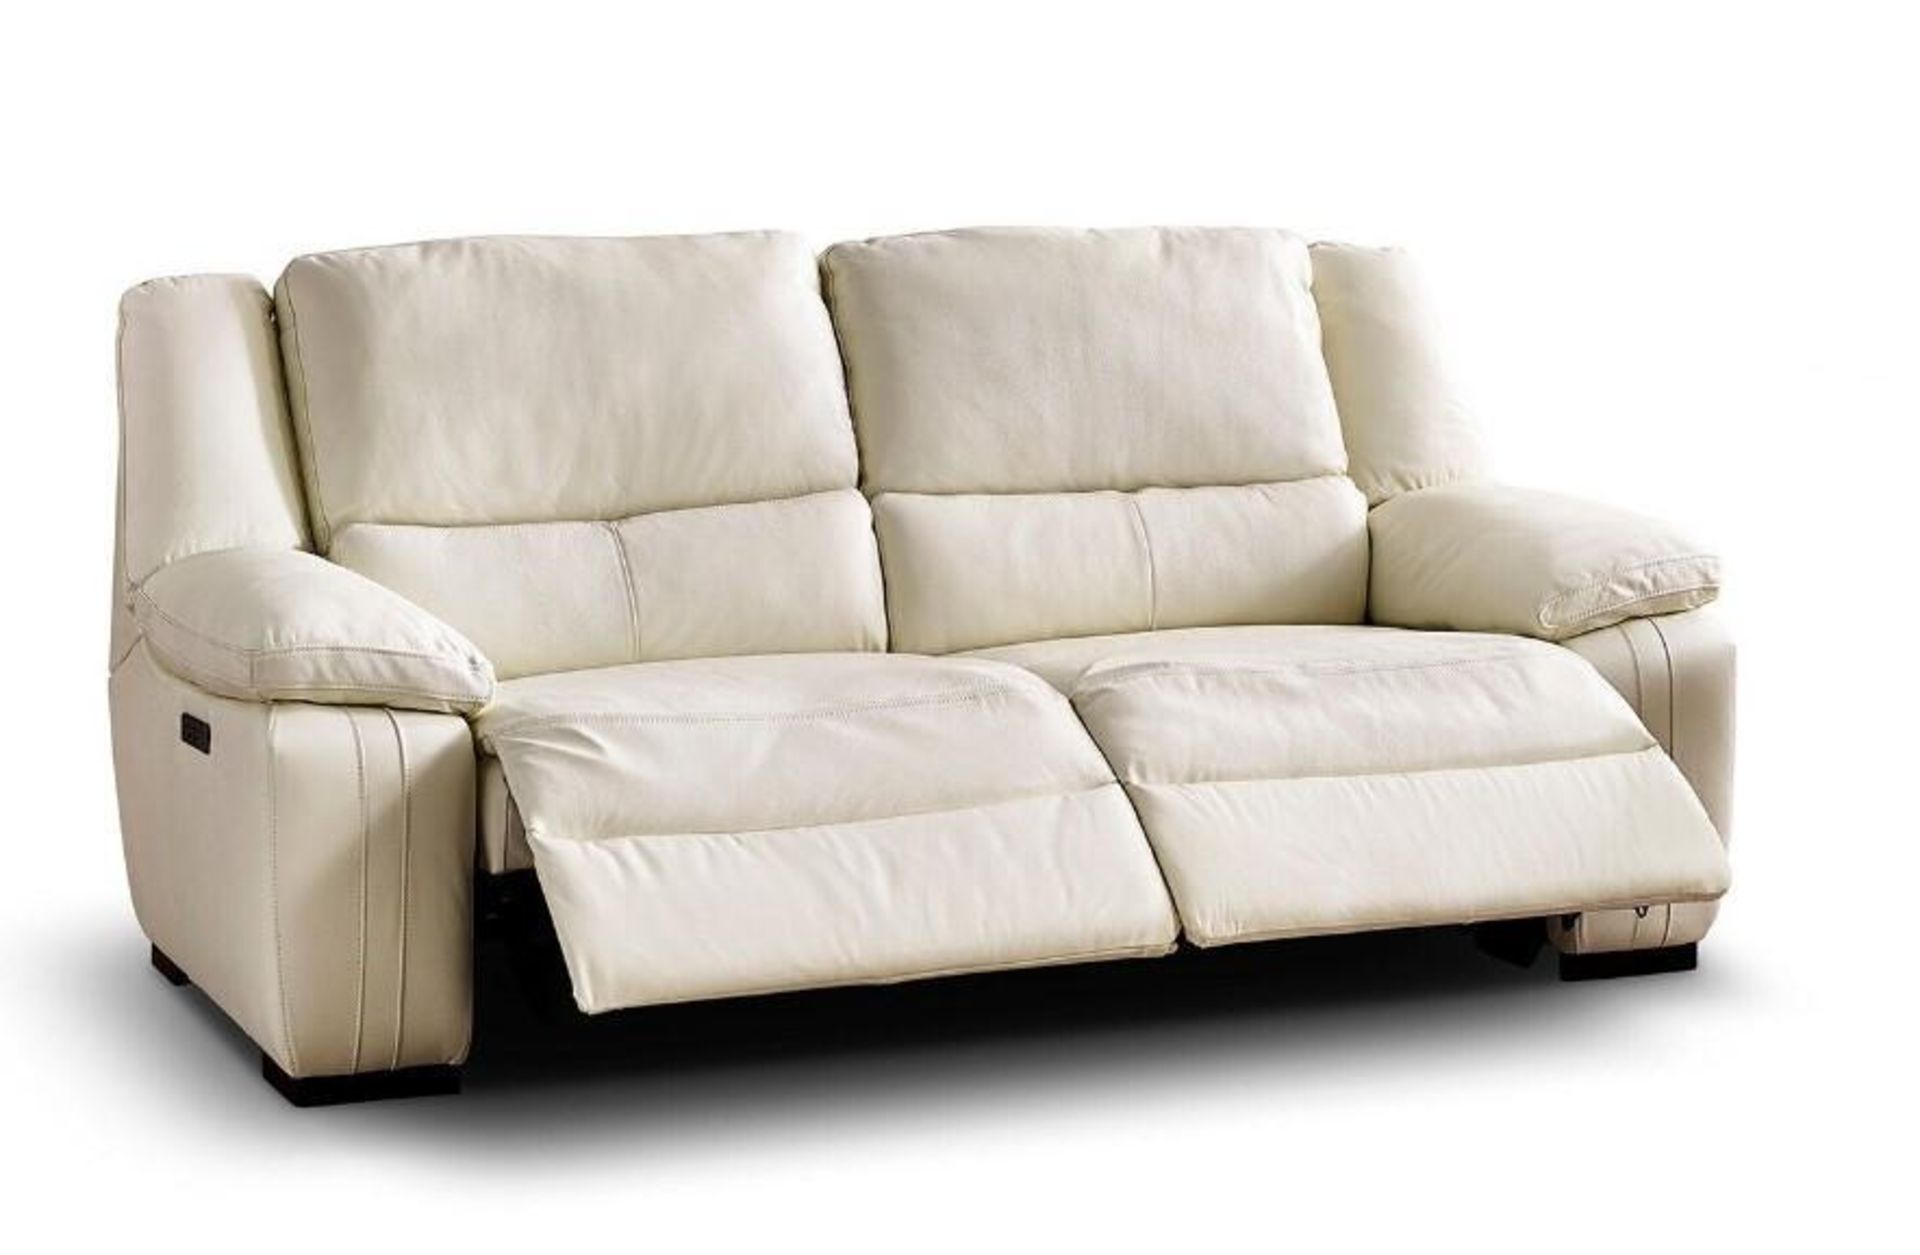 Brand new and boxed SCS Fallon 3 seater electric reclining sofa in Cream. - Image 7 of 7